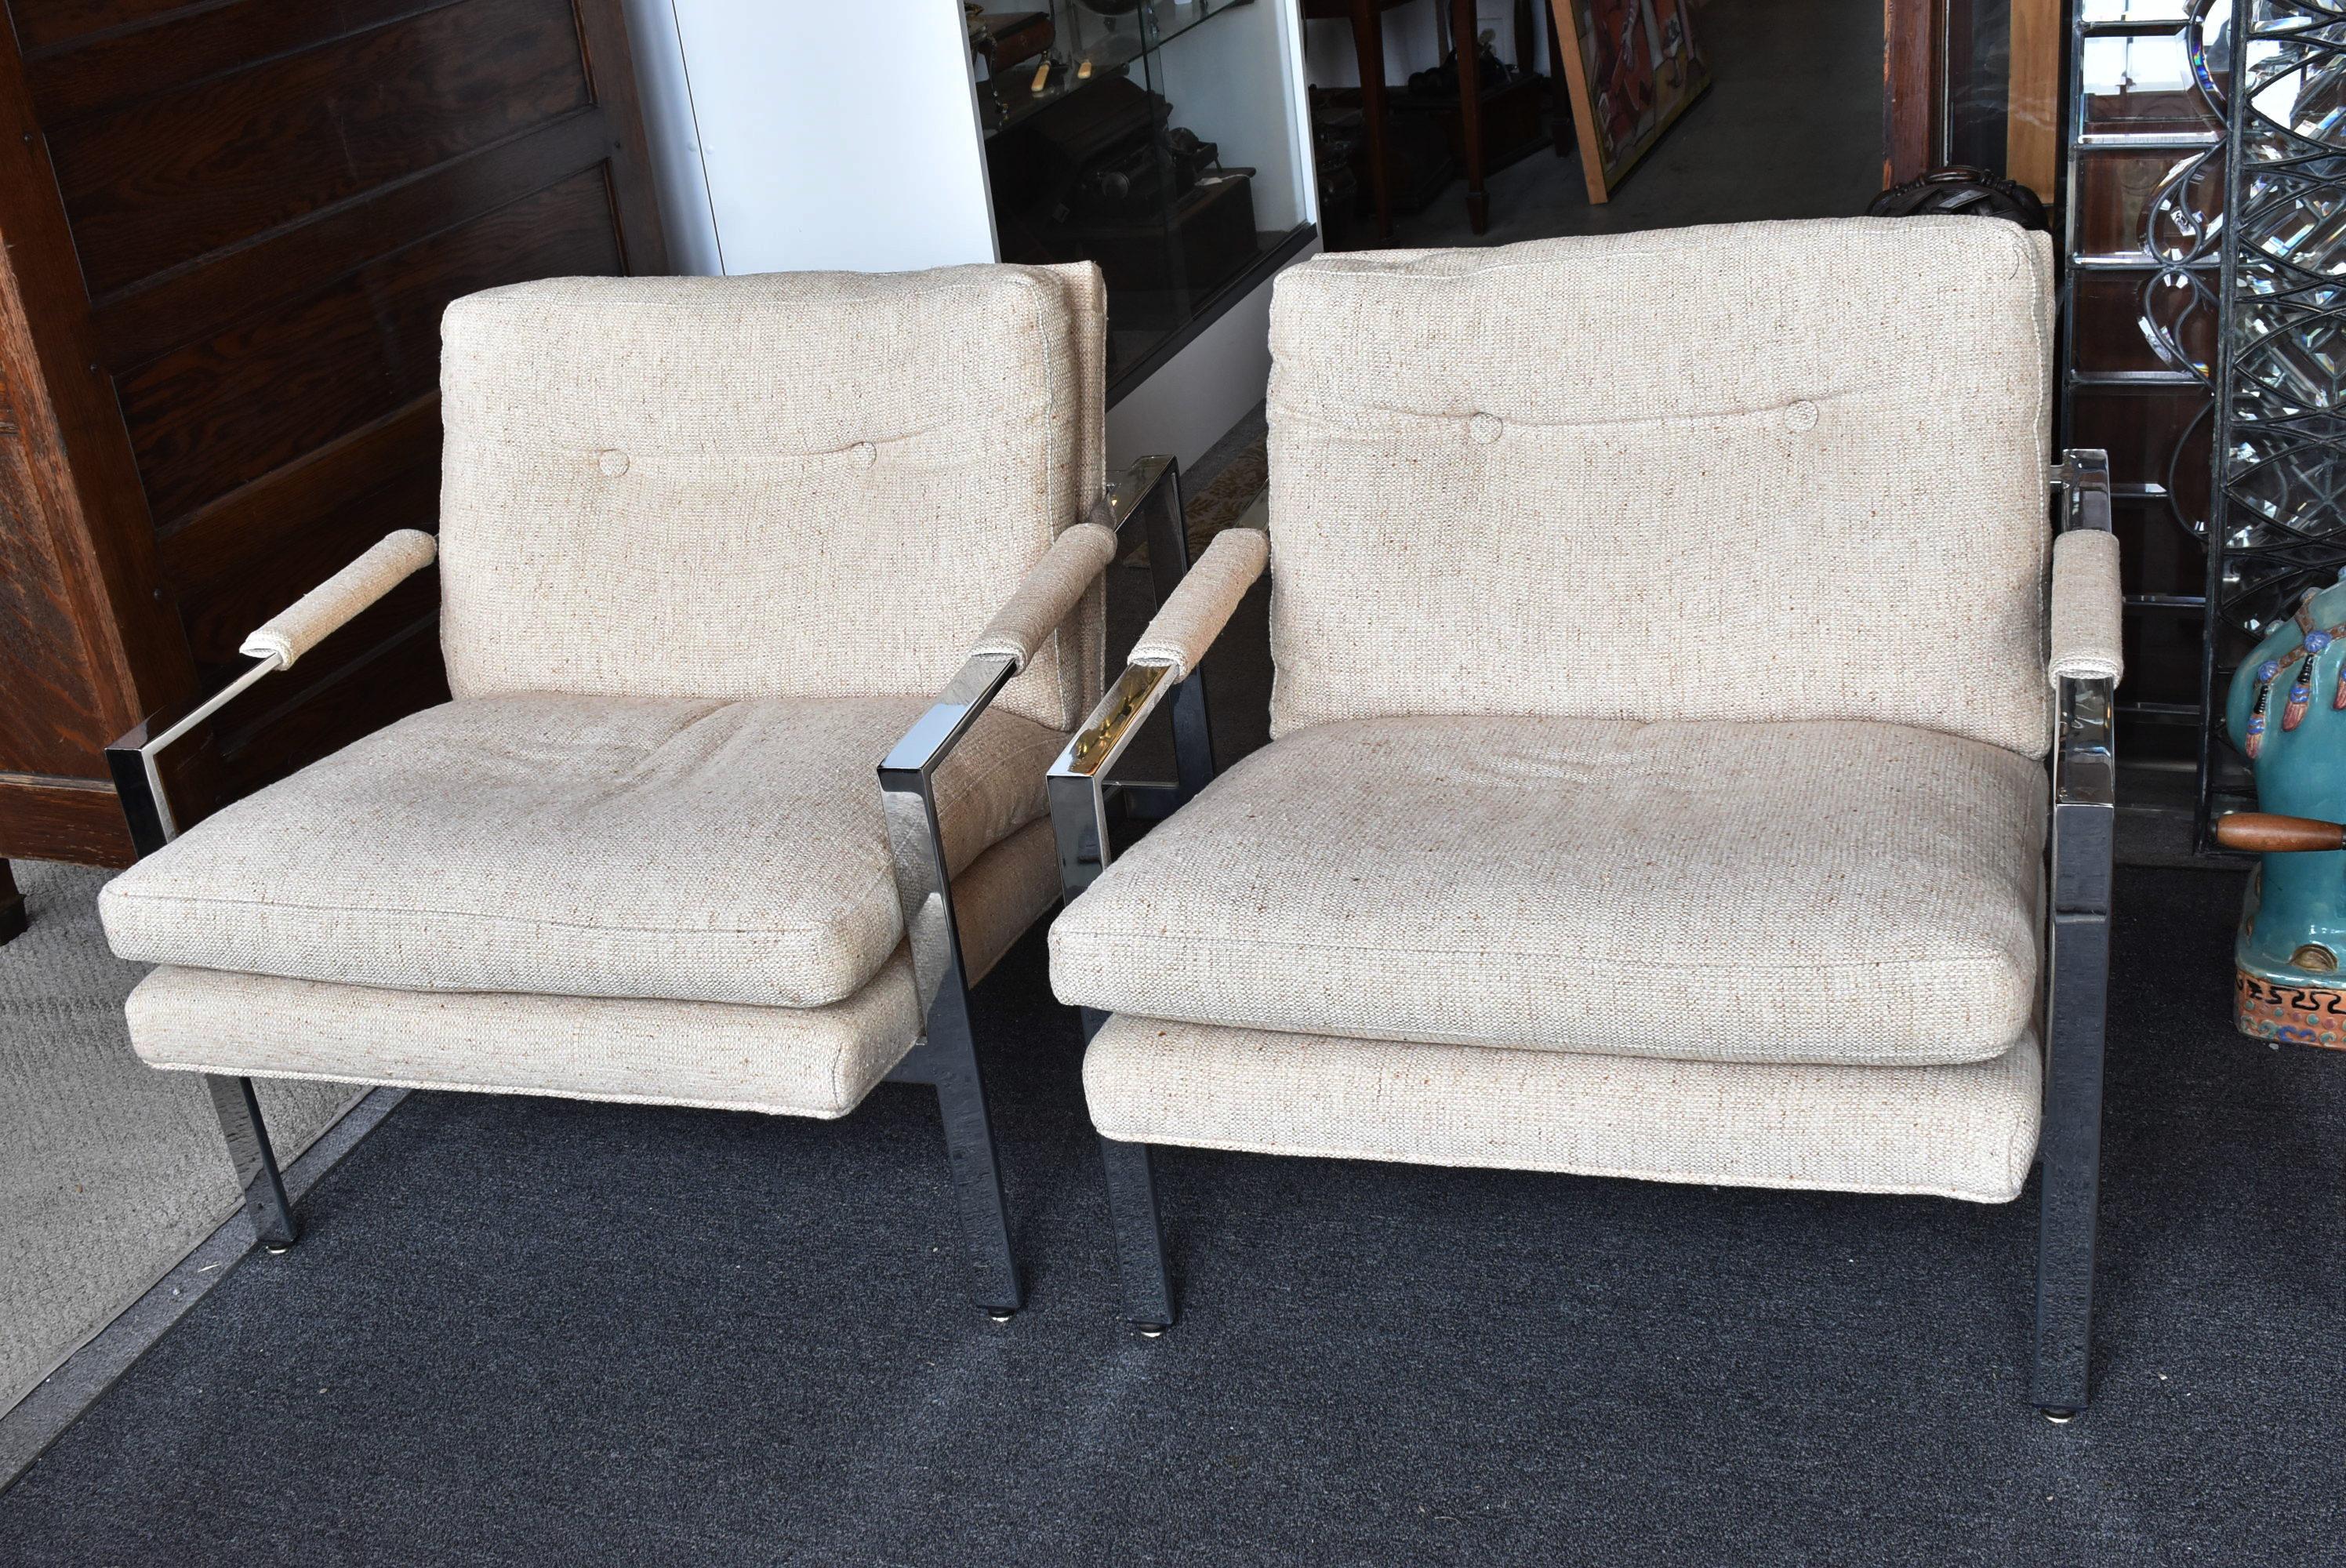 Pair Mid-Century Modern chrome and fabric side chairs in the style of Milo Baughman. Very nice condition. Cream with light brown tweed. Fabric and chrome in very good to excellent condition. No stains. Dimensions: 31